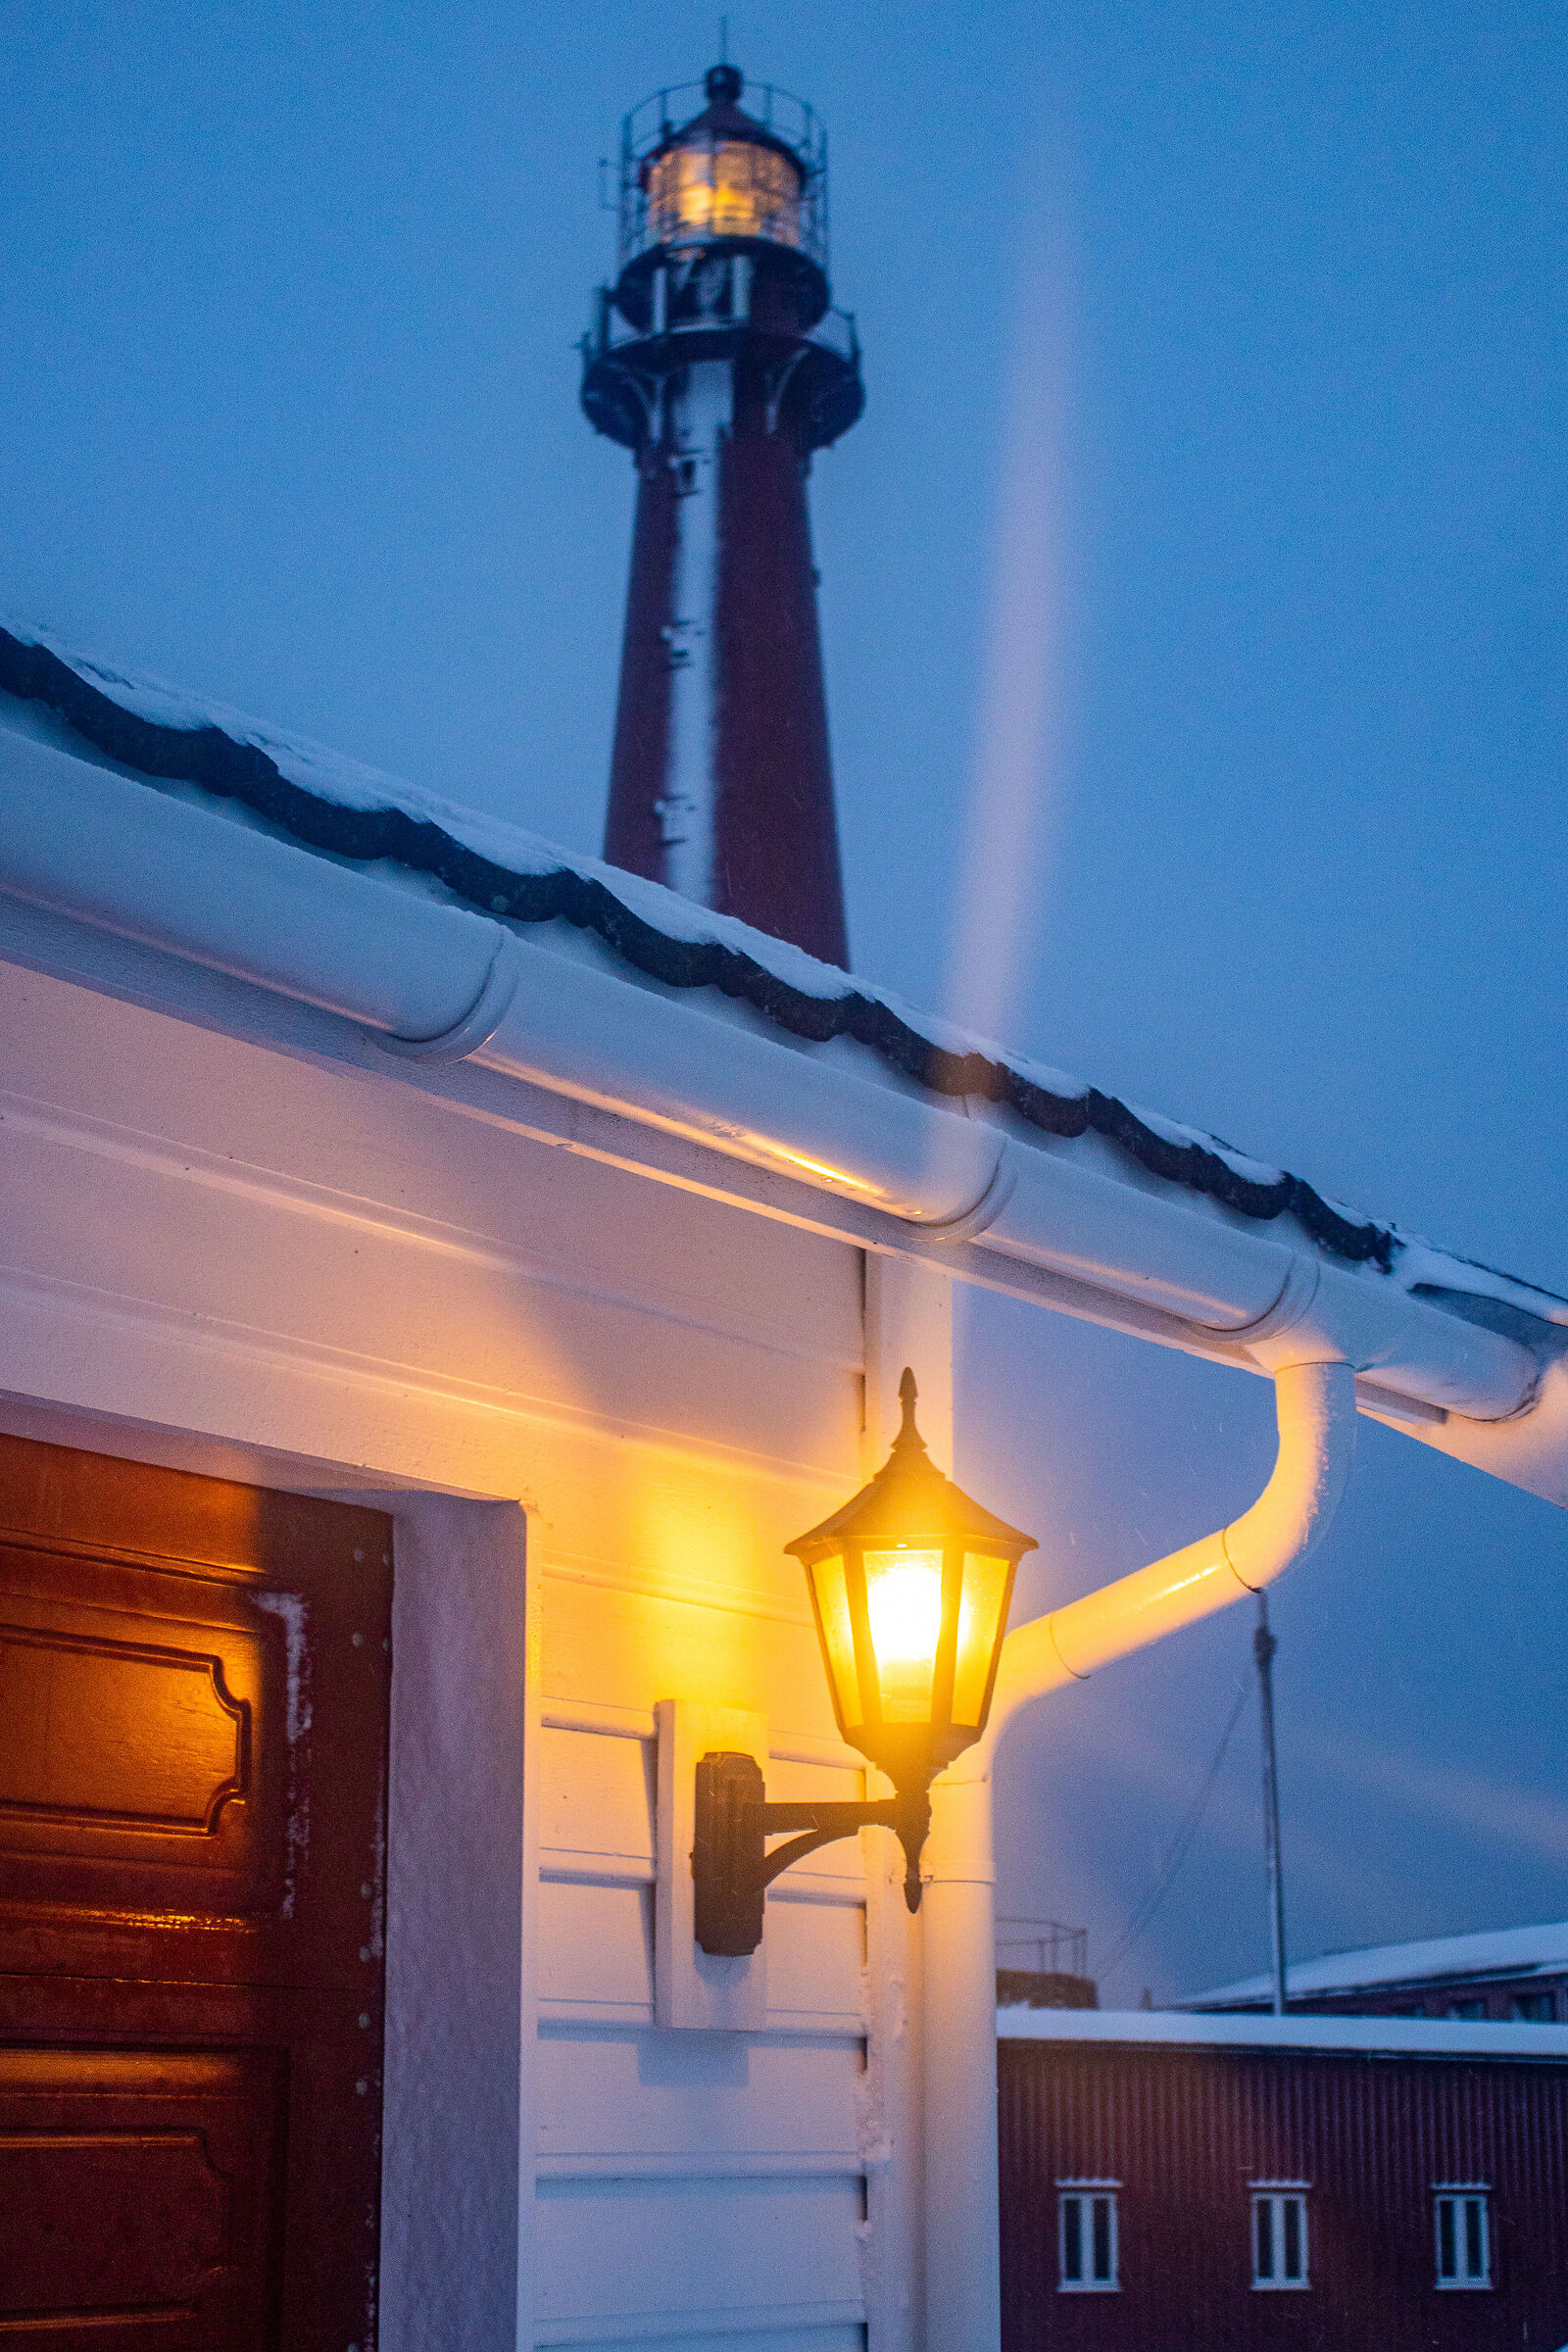 There is a light that never goes out - Andenes Lighthouse...